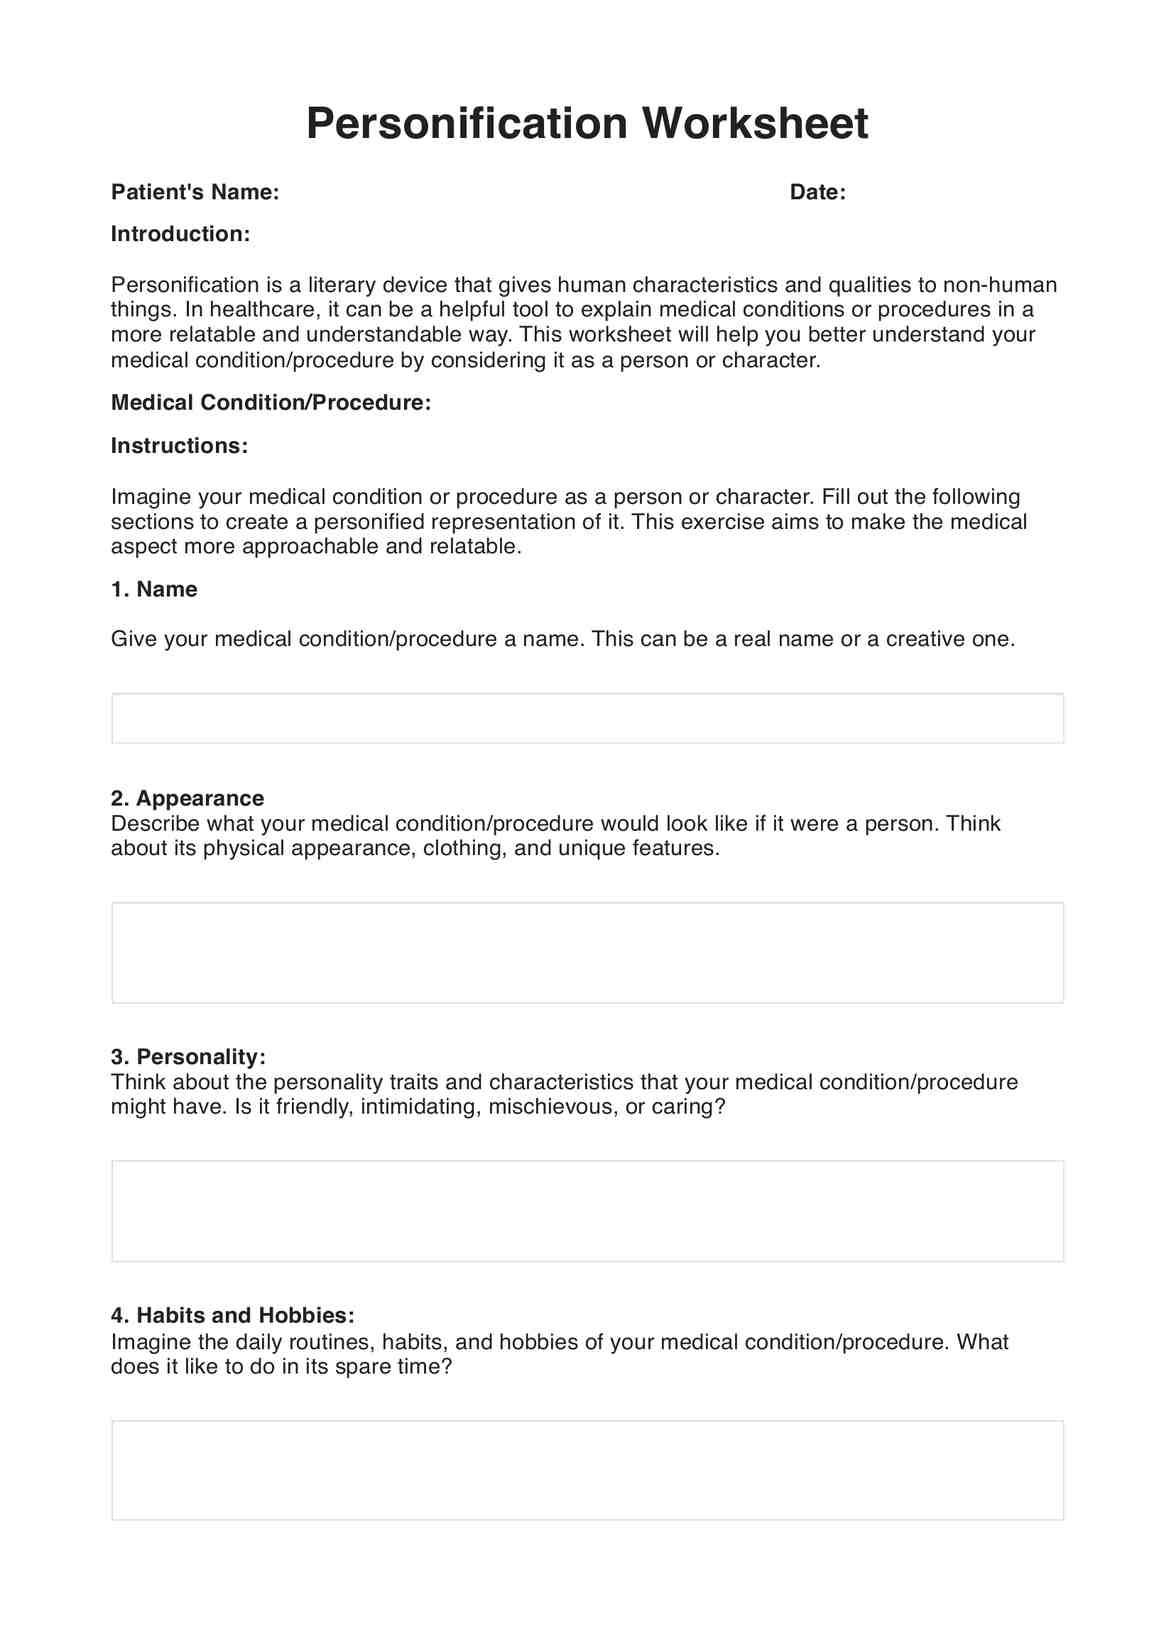 Personification Worksheets PDF Example